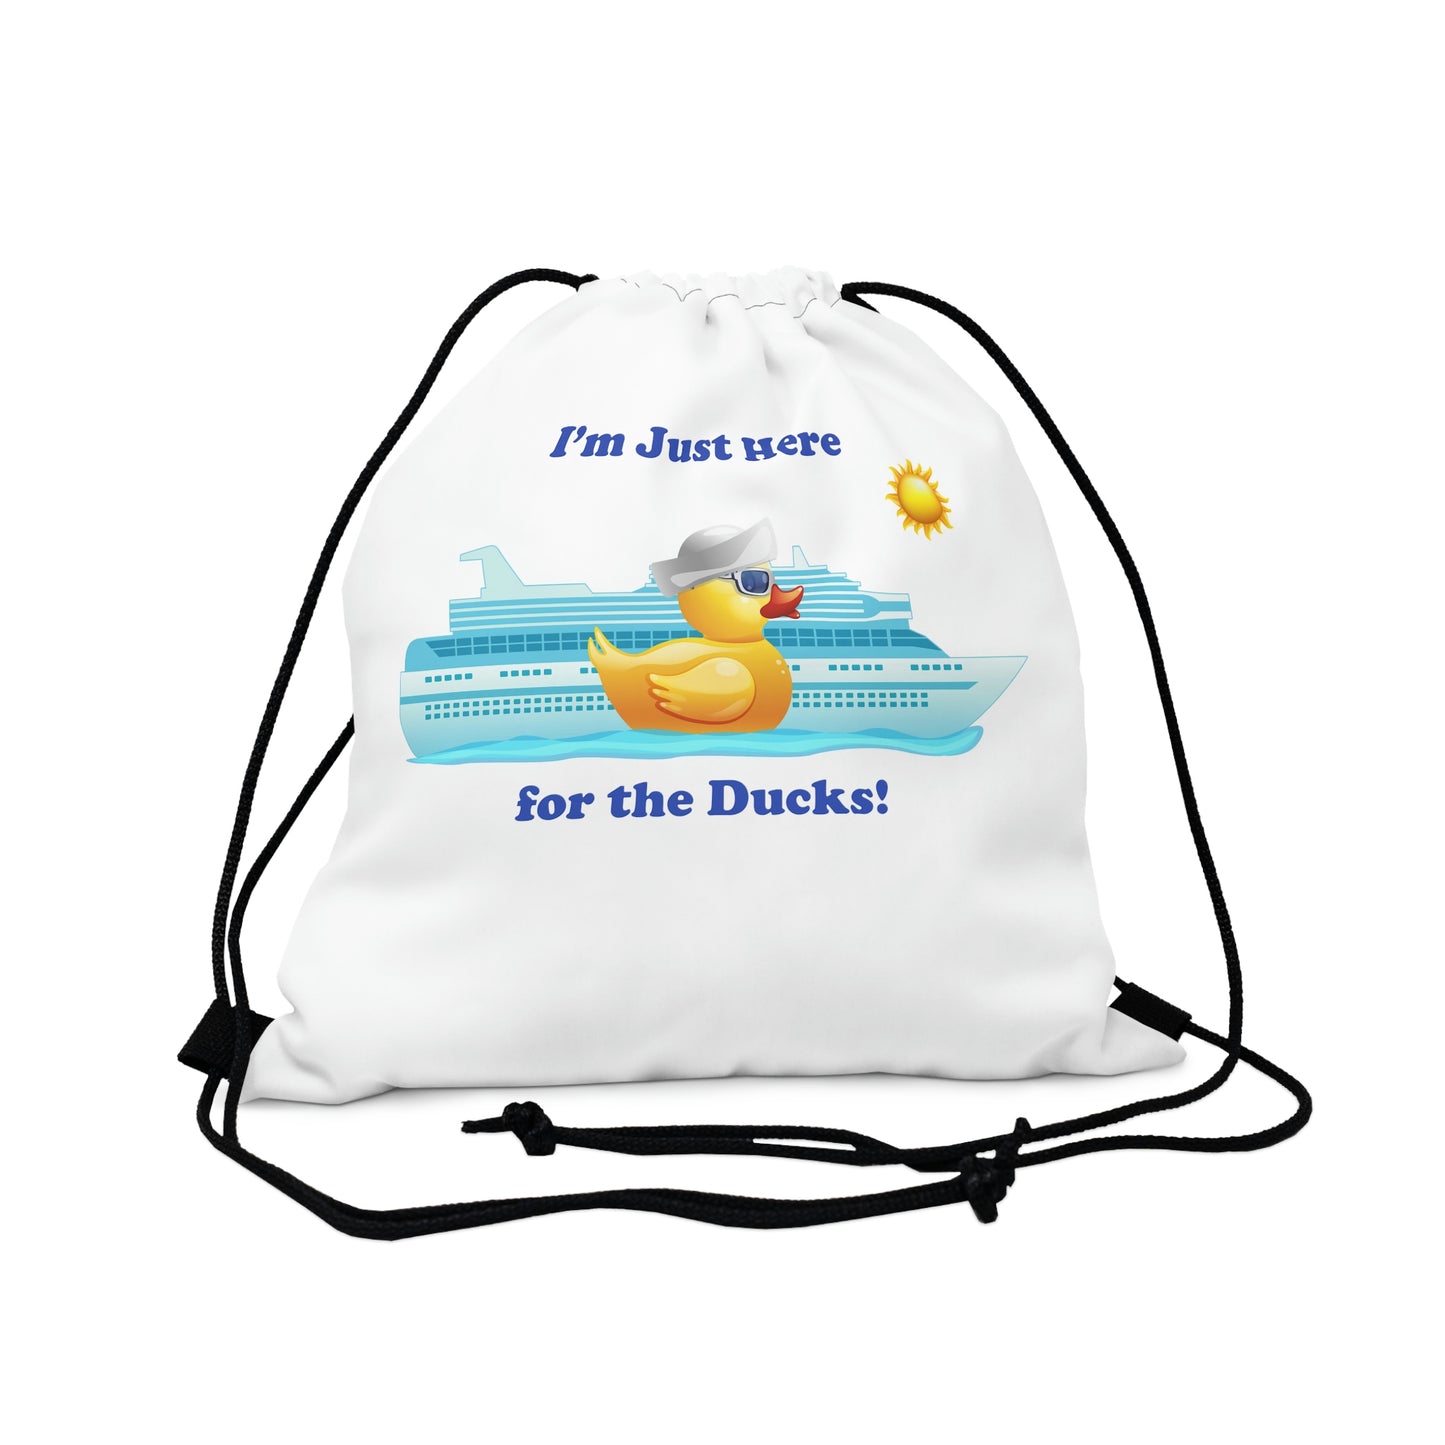 I'm just here for the ducks Drawstring Bag